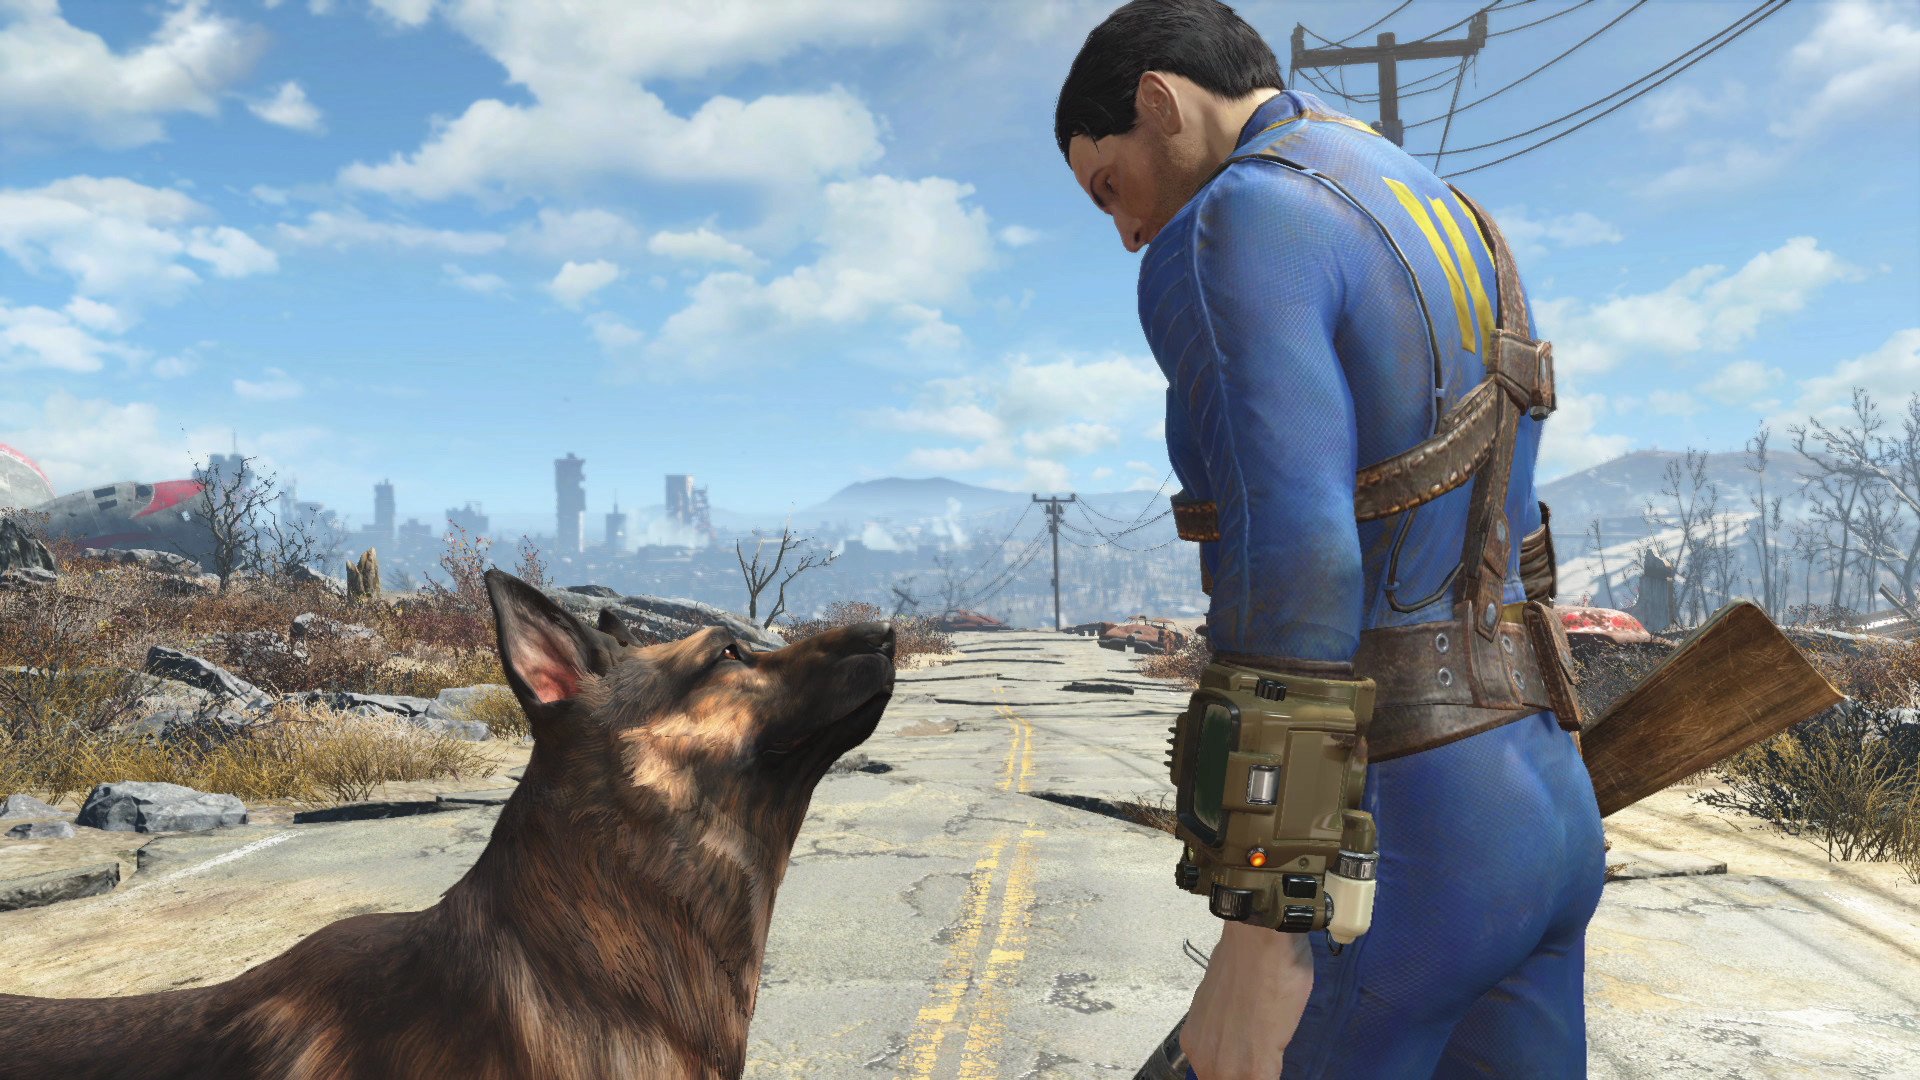 Скриншот 3 к игре Fallout 4: Game of the Year Edition [v 1.10.984.0.0 + DLCs] (2015) PC RePack от Decepticon